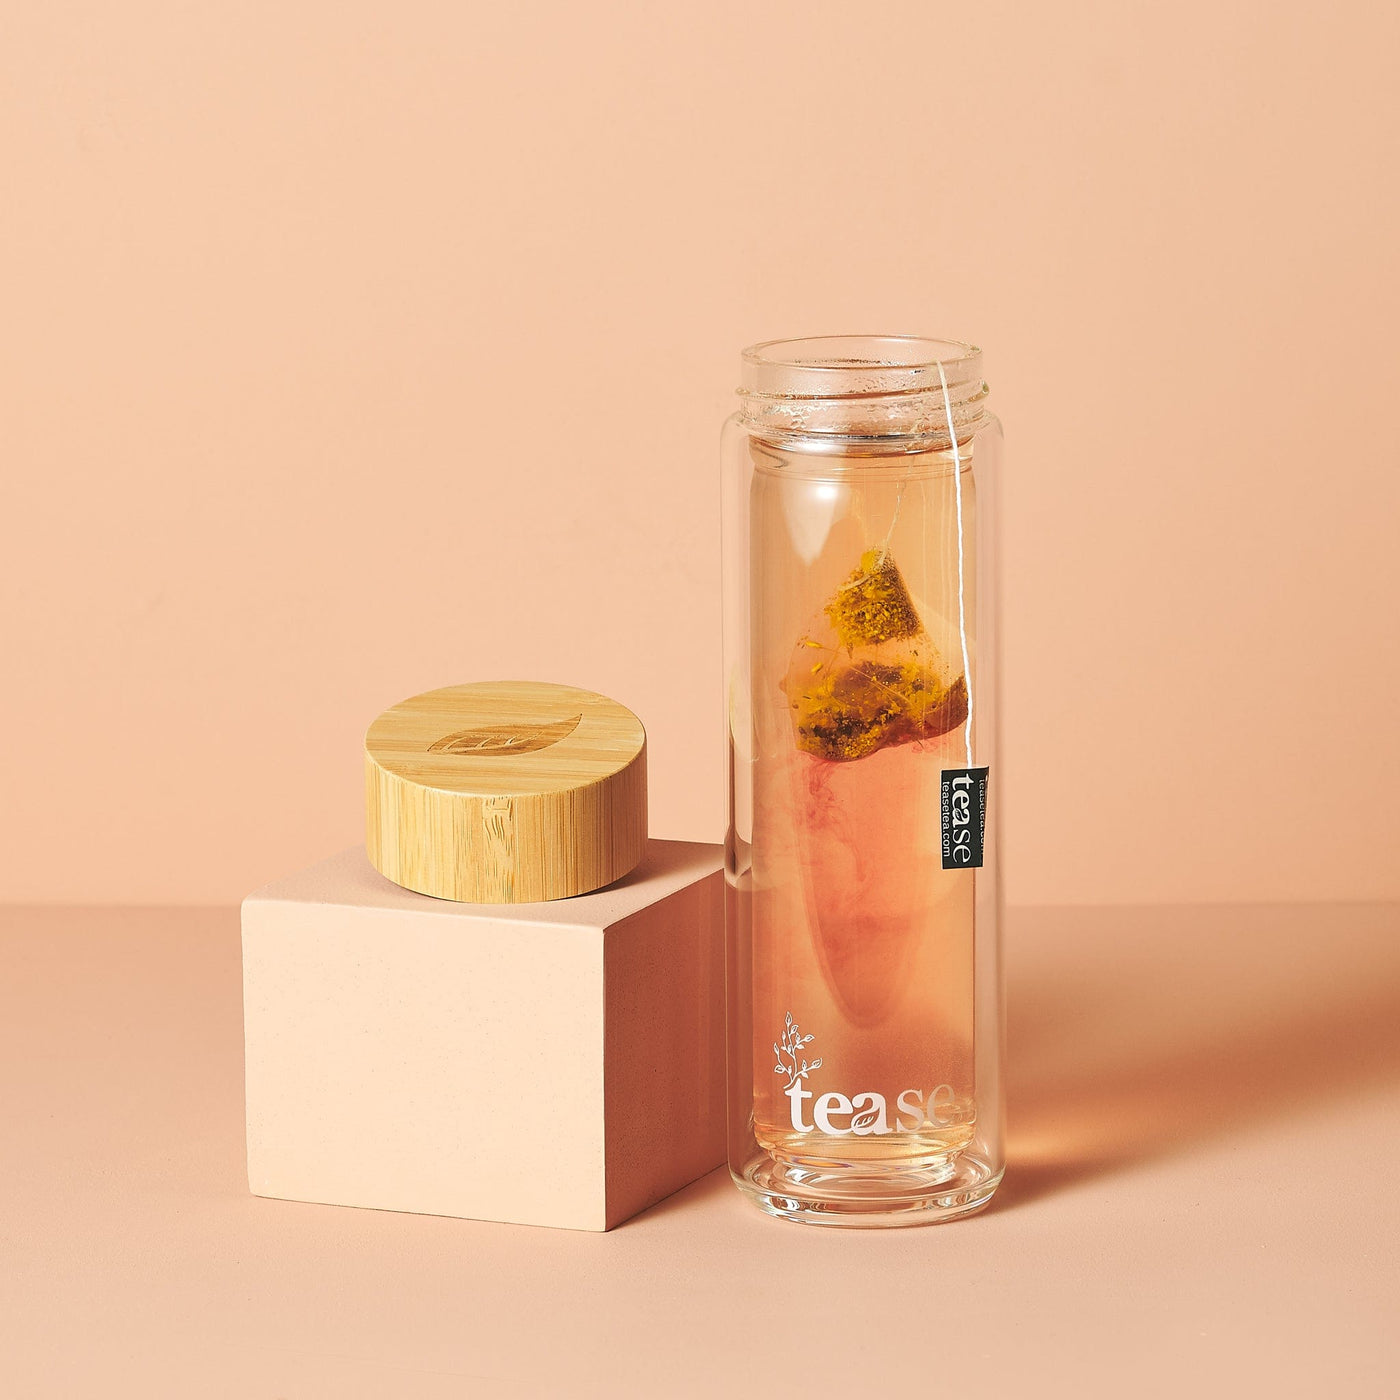 Tease Tea Tease > Drinkware > Tumblers 3 in 1 Sustainable Glass and Bamboo Tea Tumbler 3-in-1 Glass And Bamboo Tumbler - Tease Wellness Blends